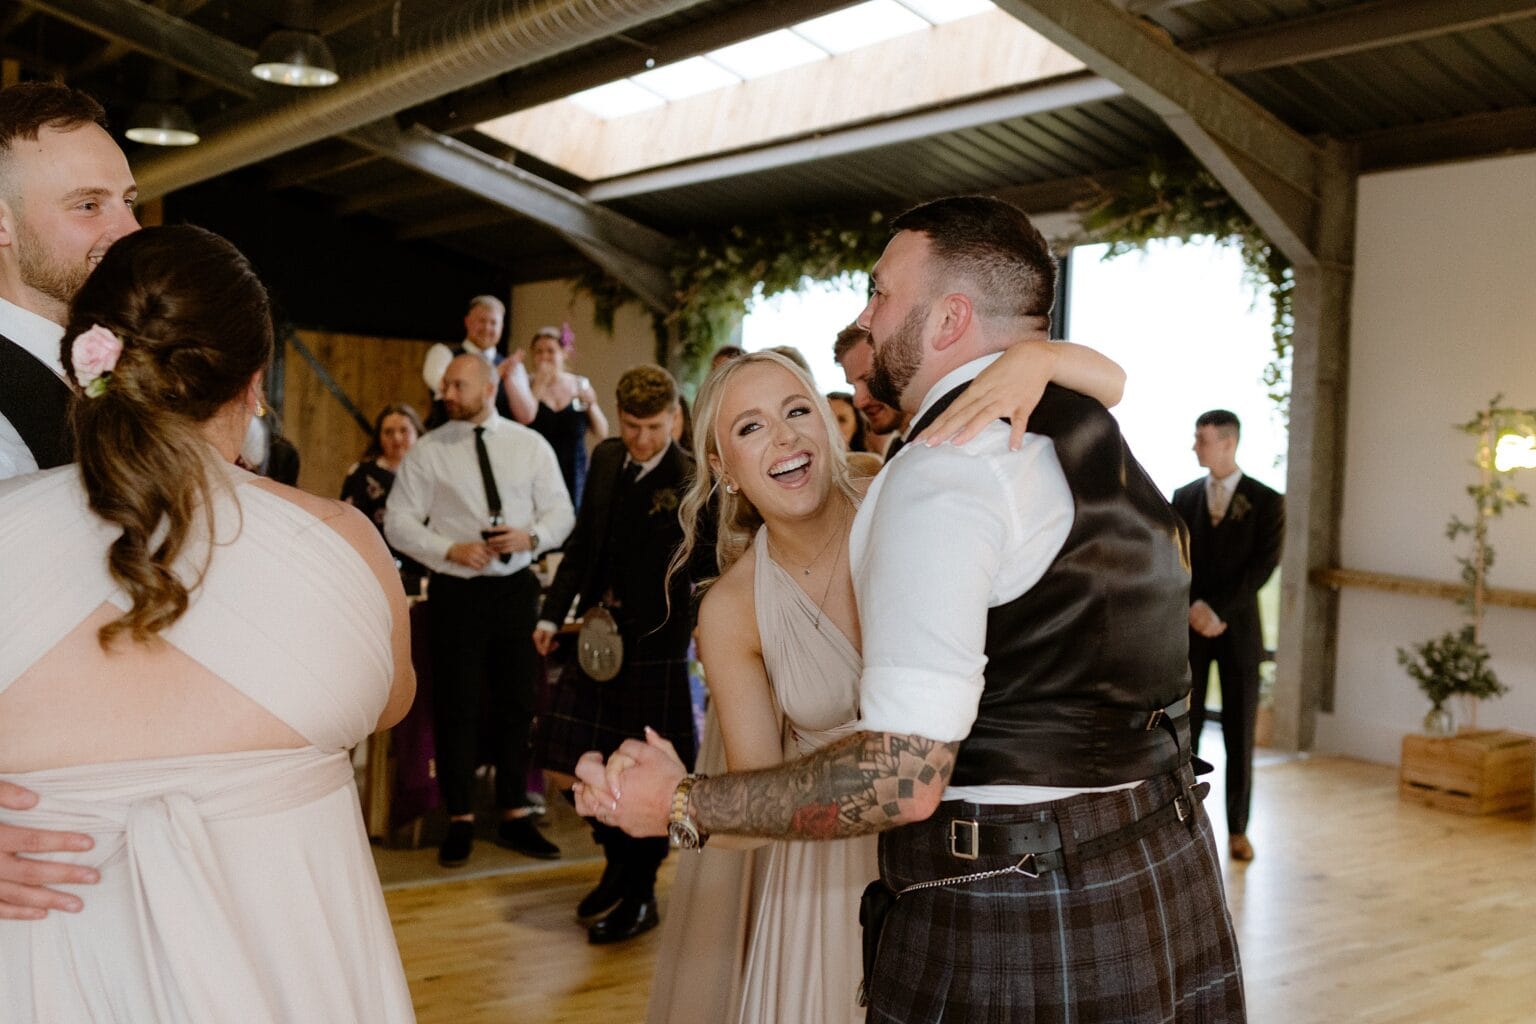 guests dance at the evening reception following the wedding at cairns farm estate in kirknewton in scotland a window surrounded by greenery is visible in the background